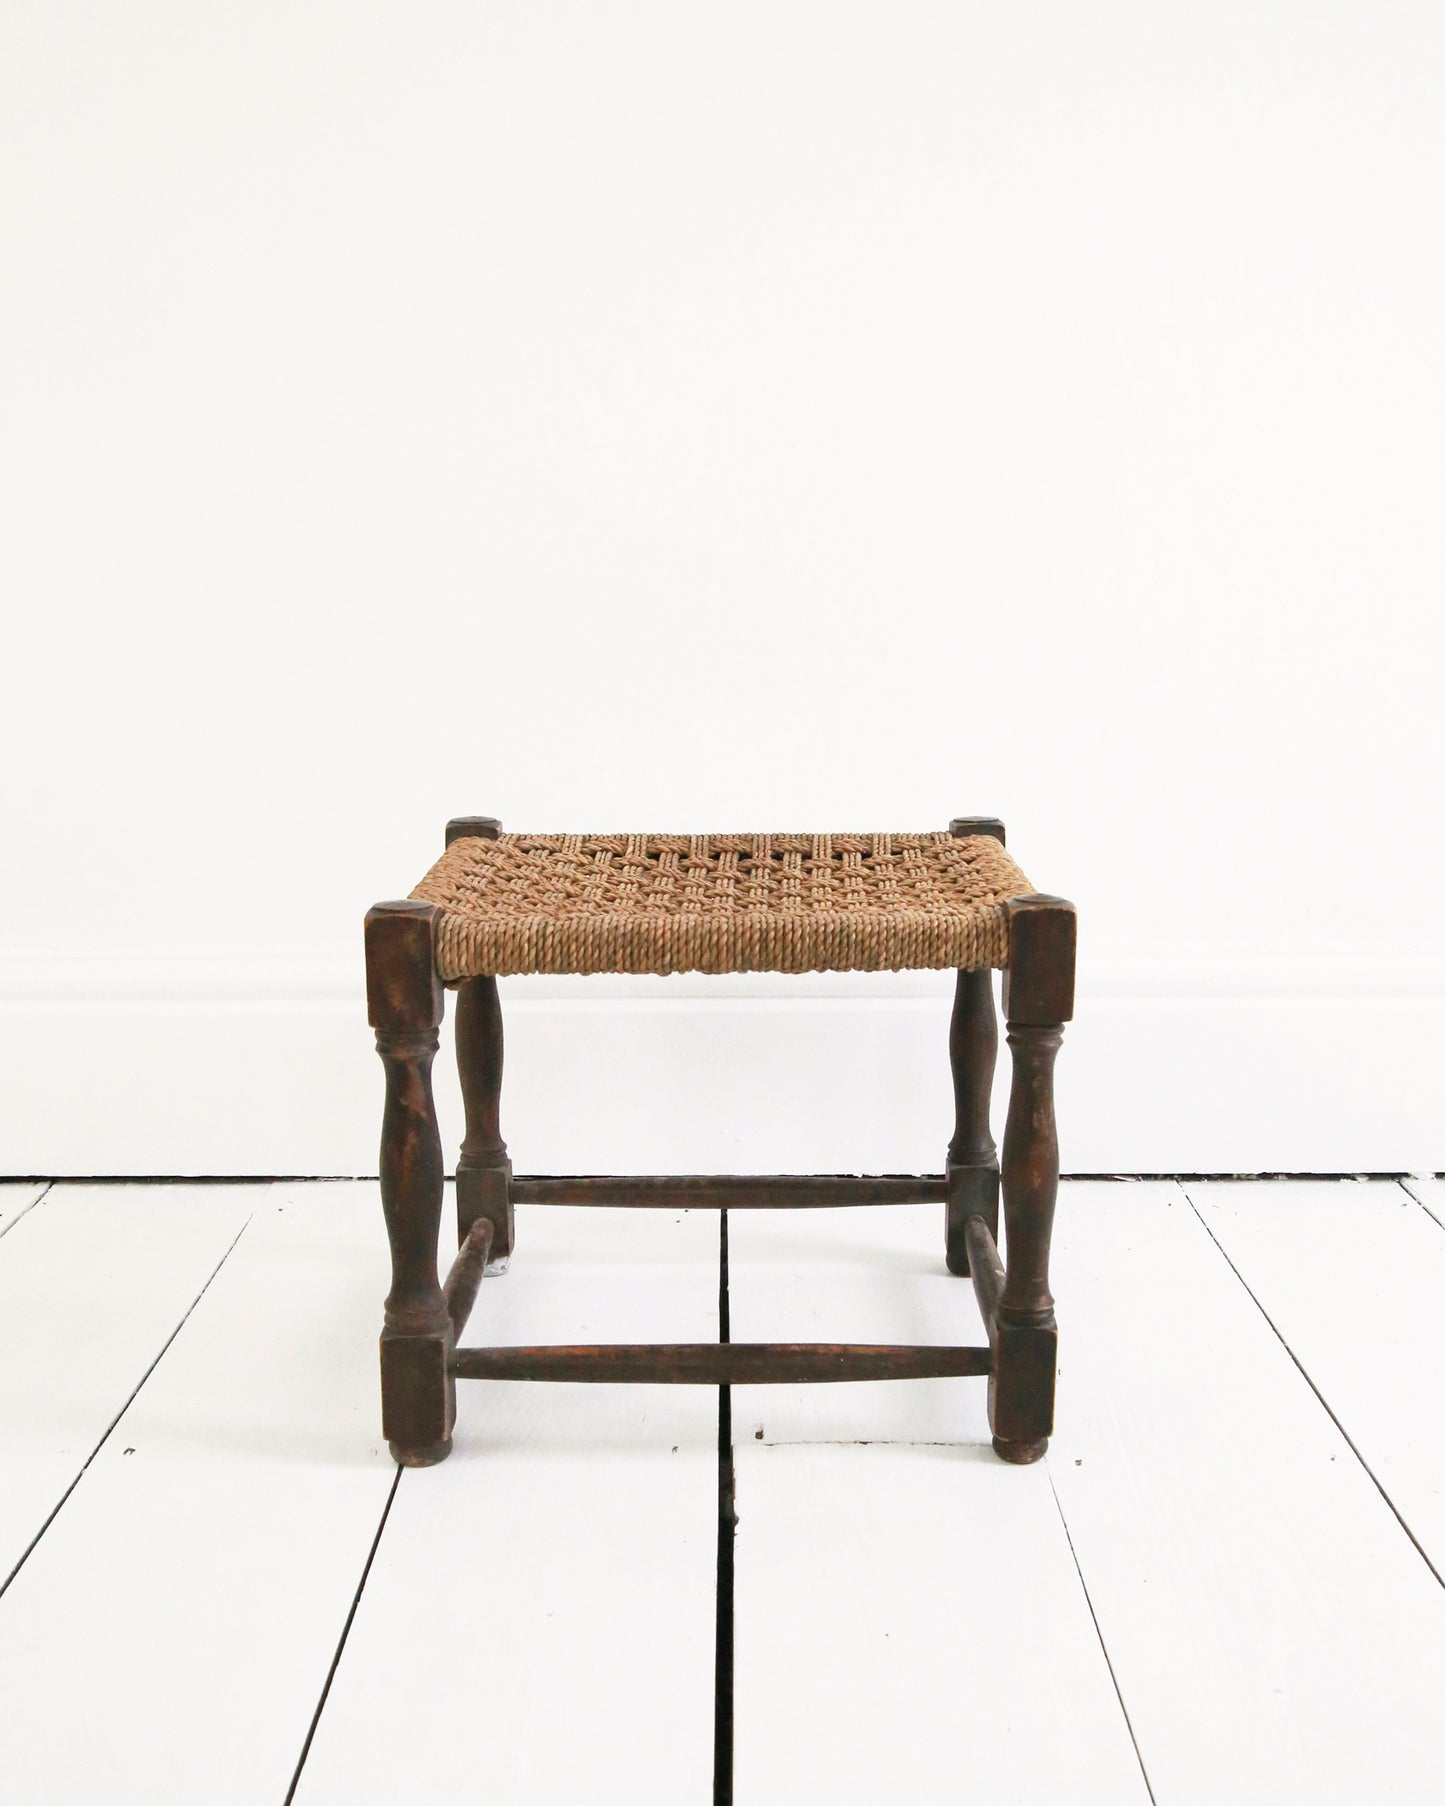 Vintage woven seagrass and wooden stool